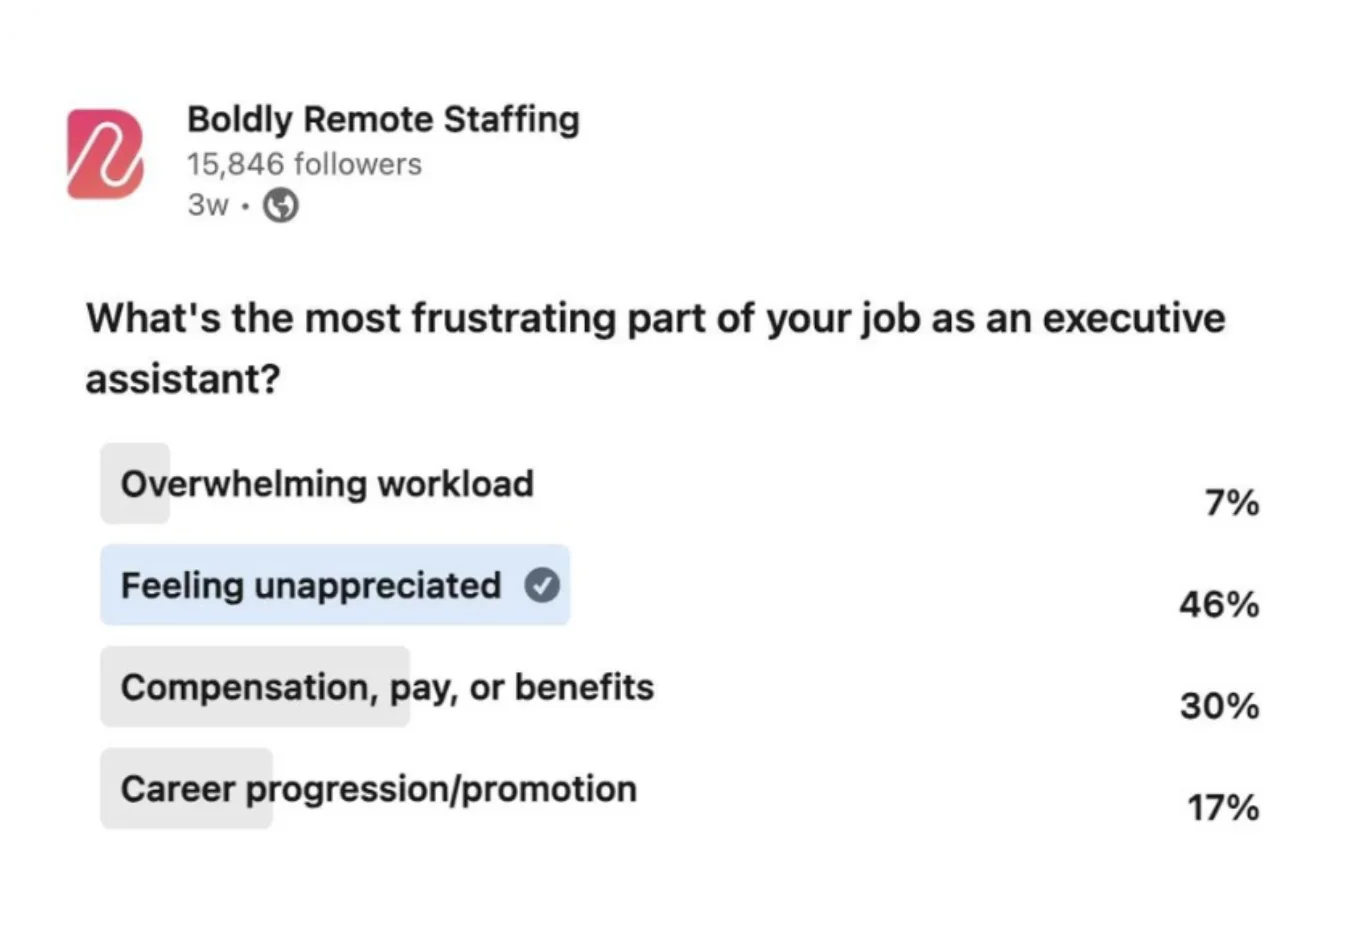 What do executive assistants find most frustrating about their job? Poll showing 48% said feeling unappreciated.